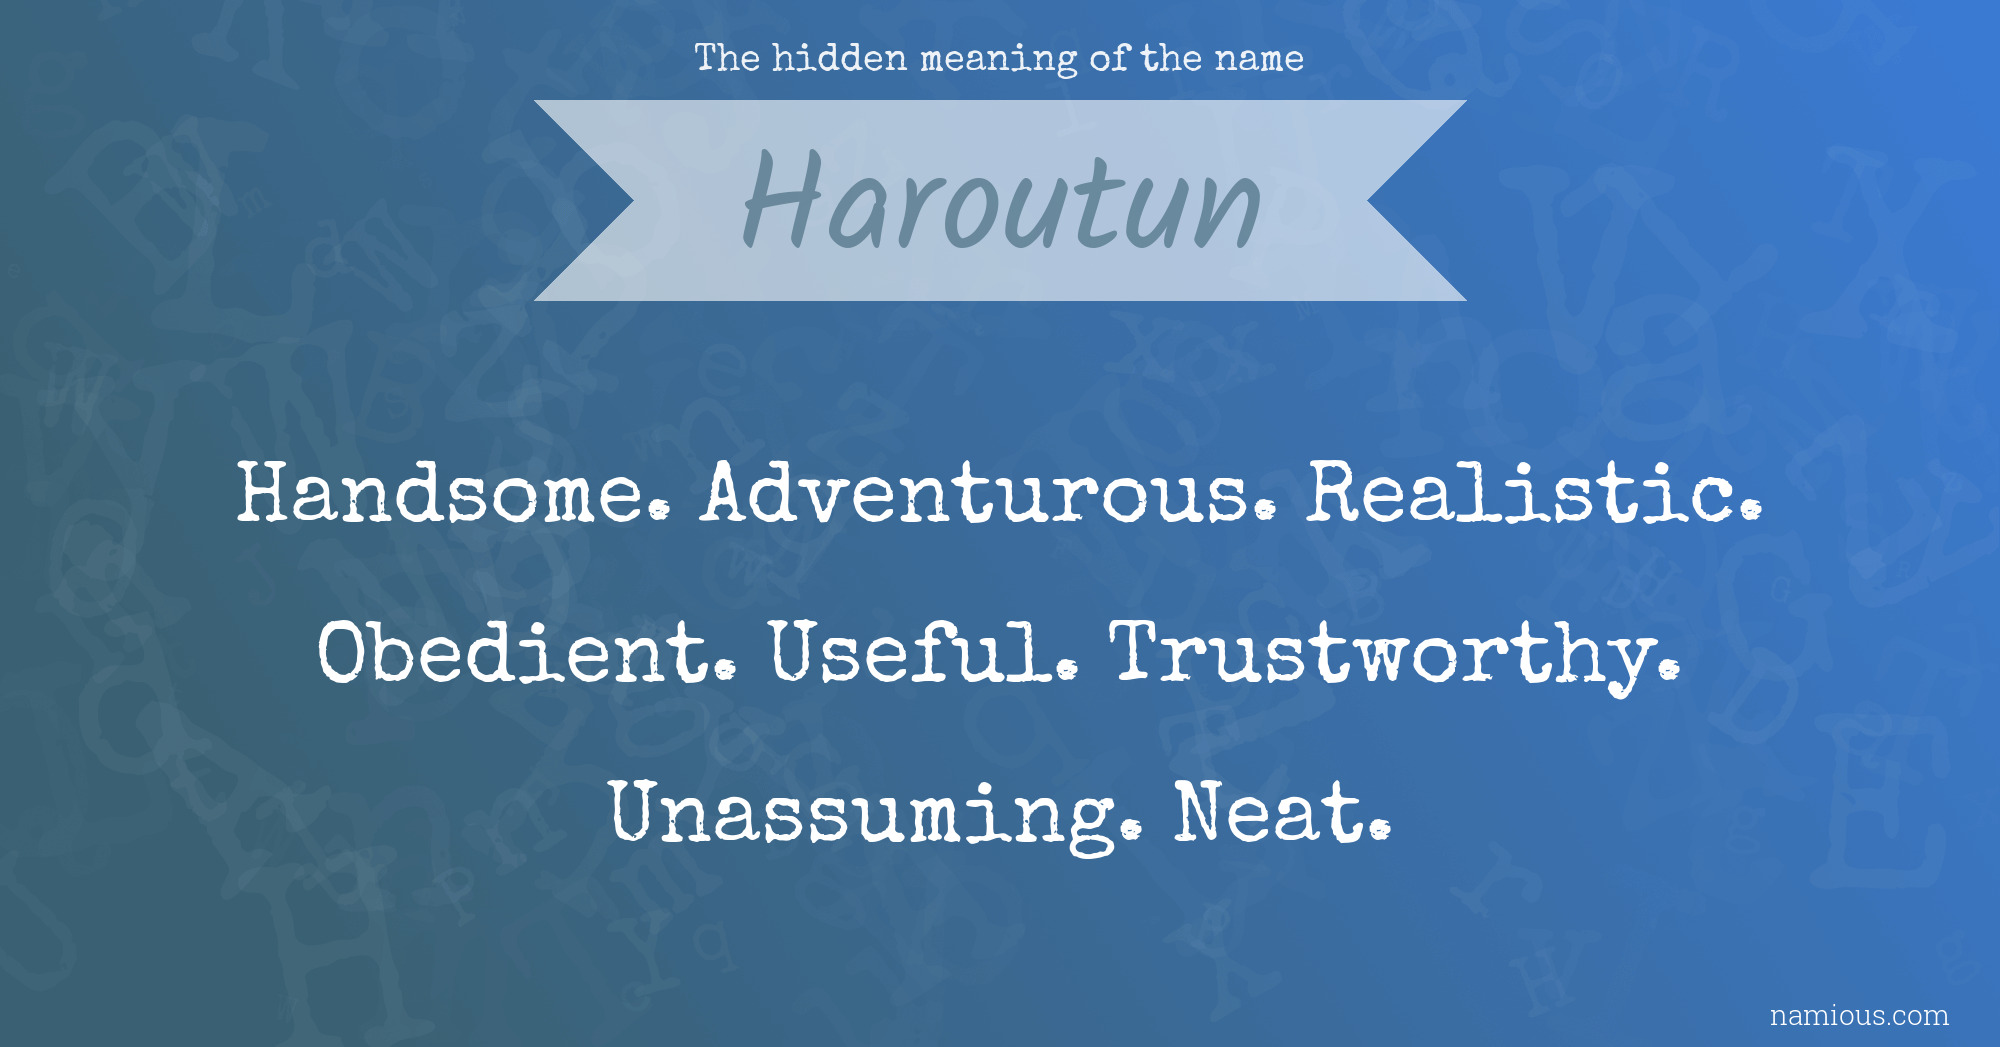 The hidden meaning of the name Haroutun